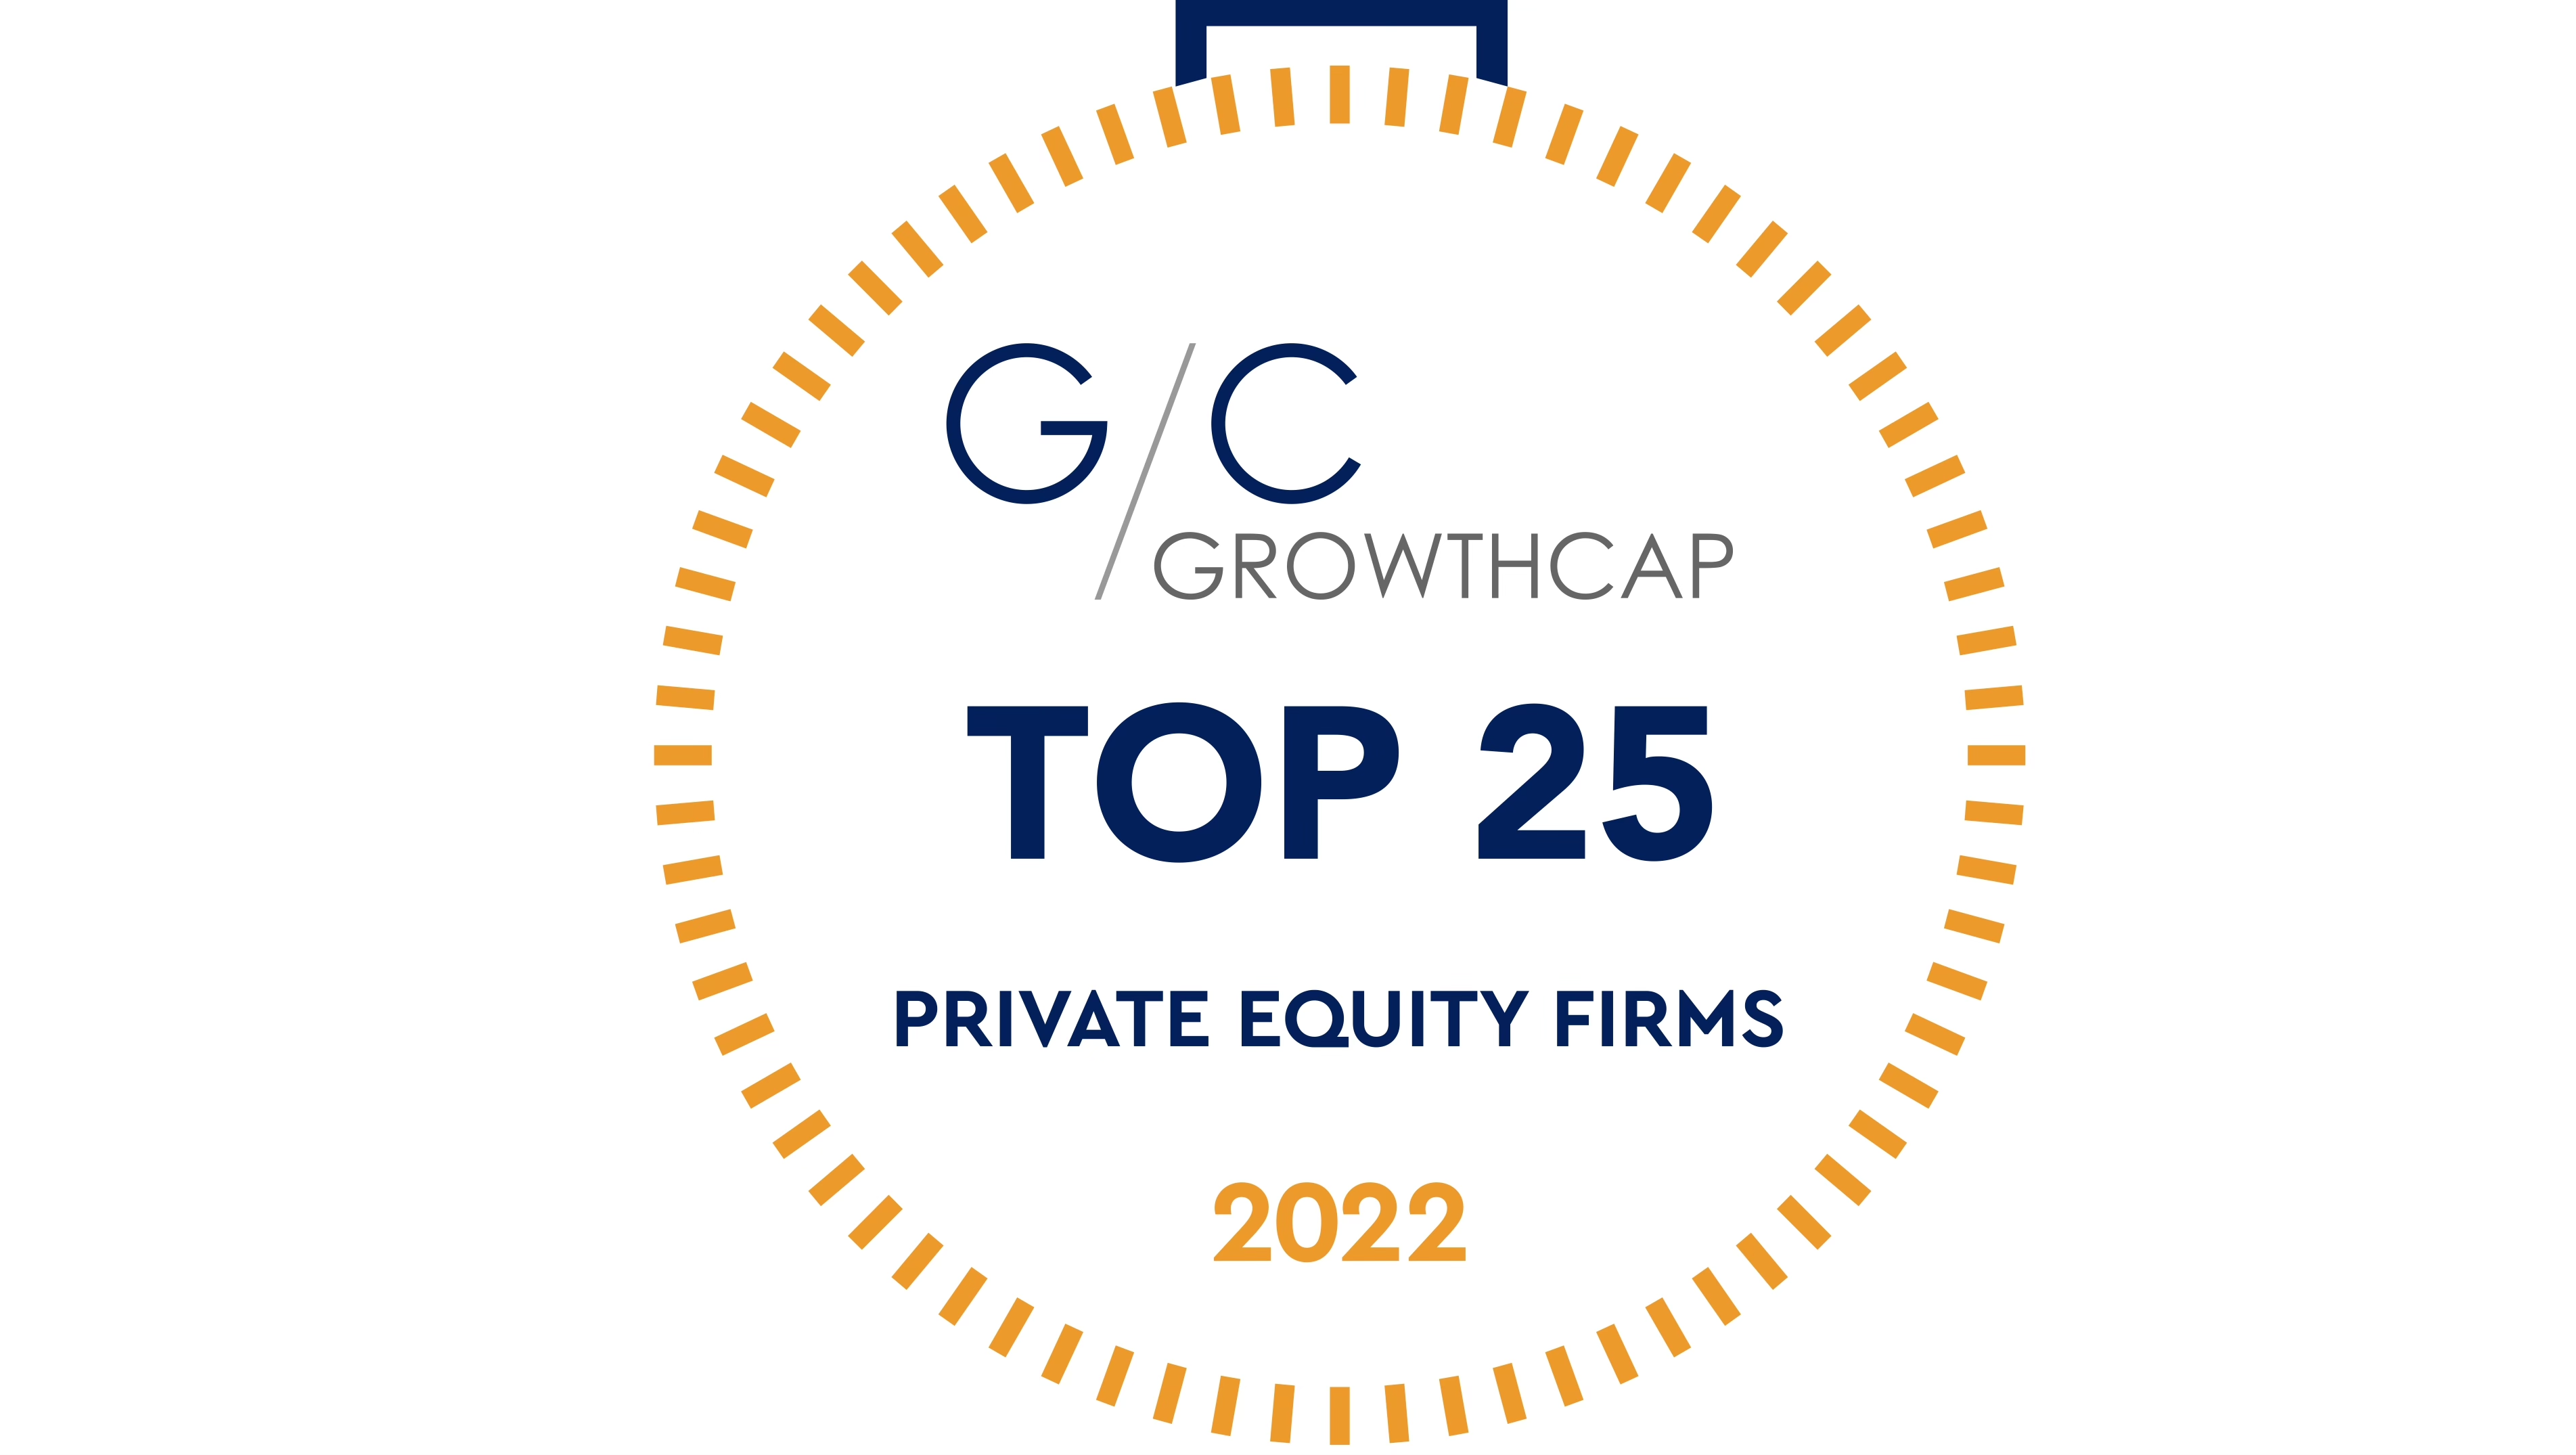 The Top 25 Private Equity Firms of 2022